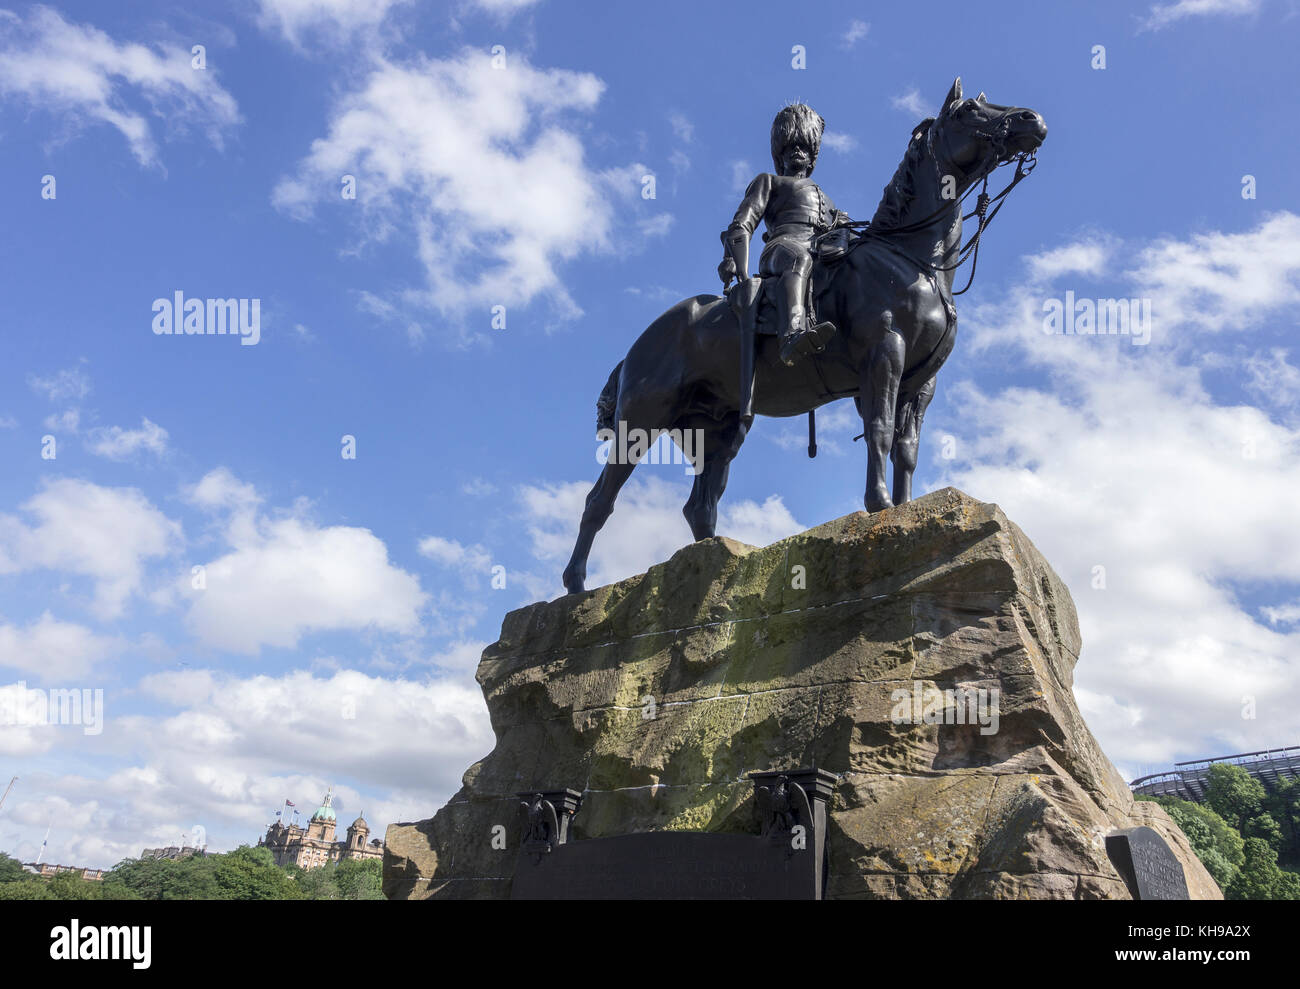 The Royal Scots Greys Monument Statue On West Princes Street Edinburgh Scotland Depicting An Equestrian Bronze Of A Royal Scots Dragoon Soldier Stock Photo